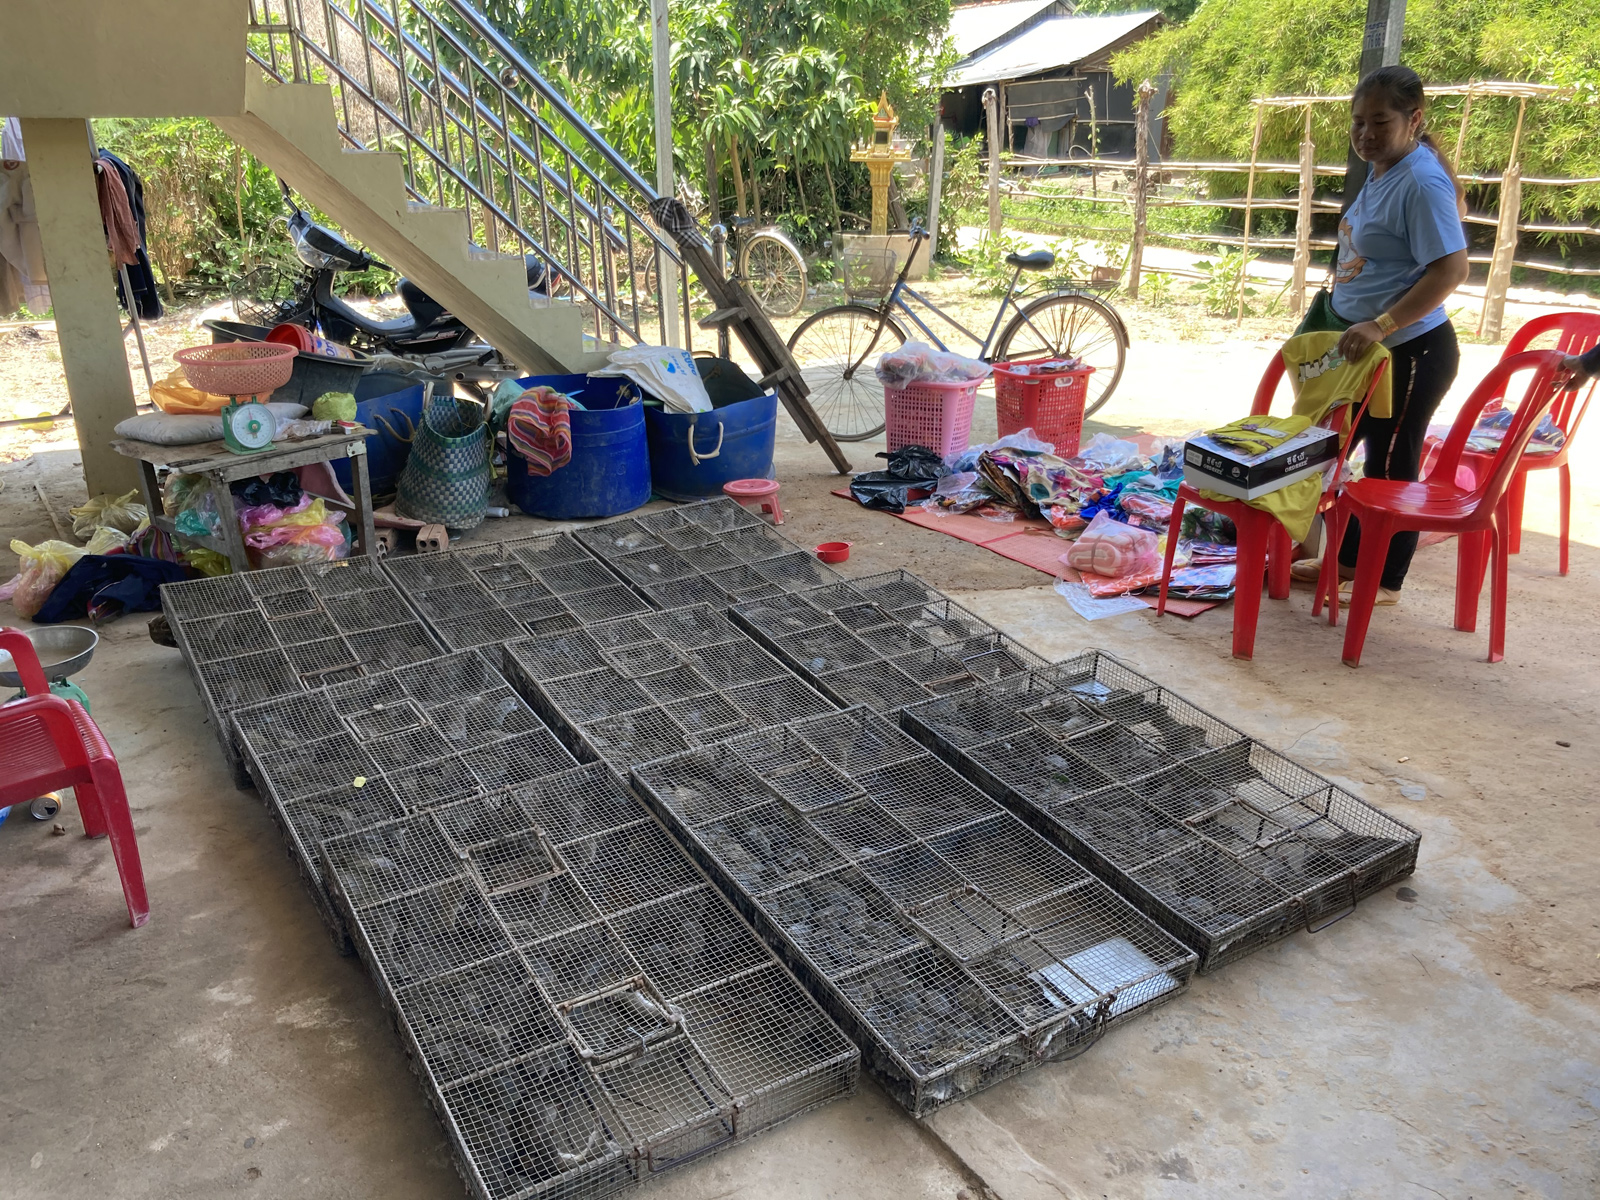 Takeo province rat brokers store their daily procurement of rats in their front yard, before it is sent across the border to Vietnam.